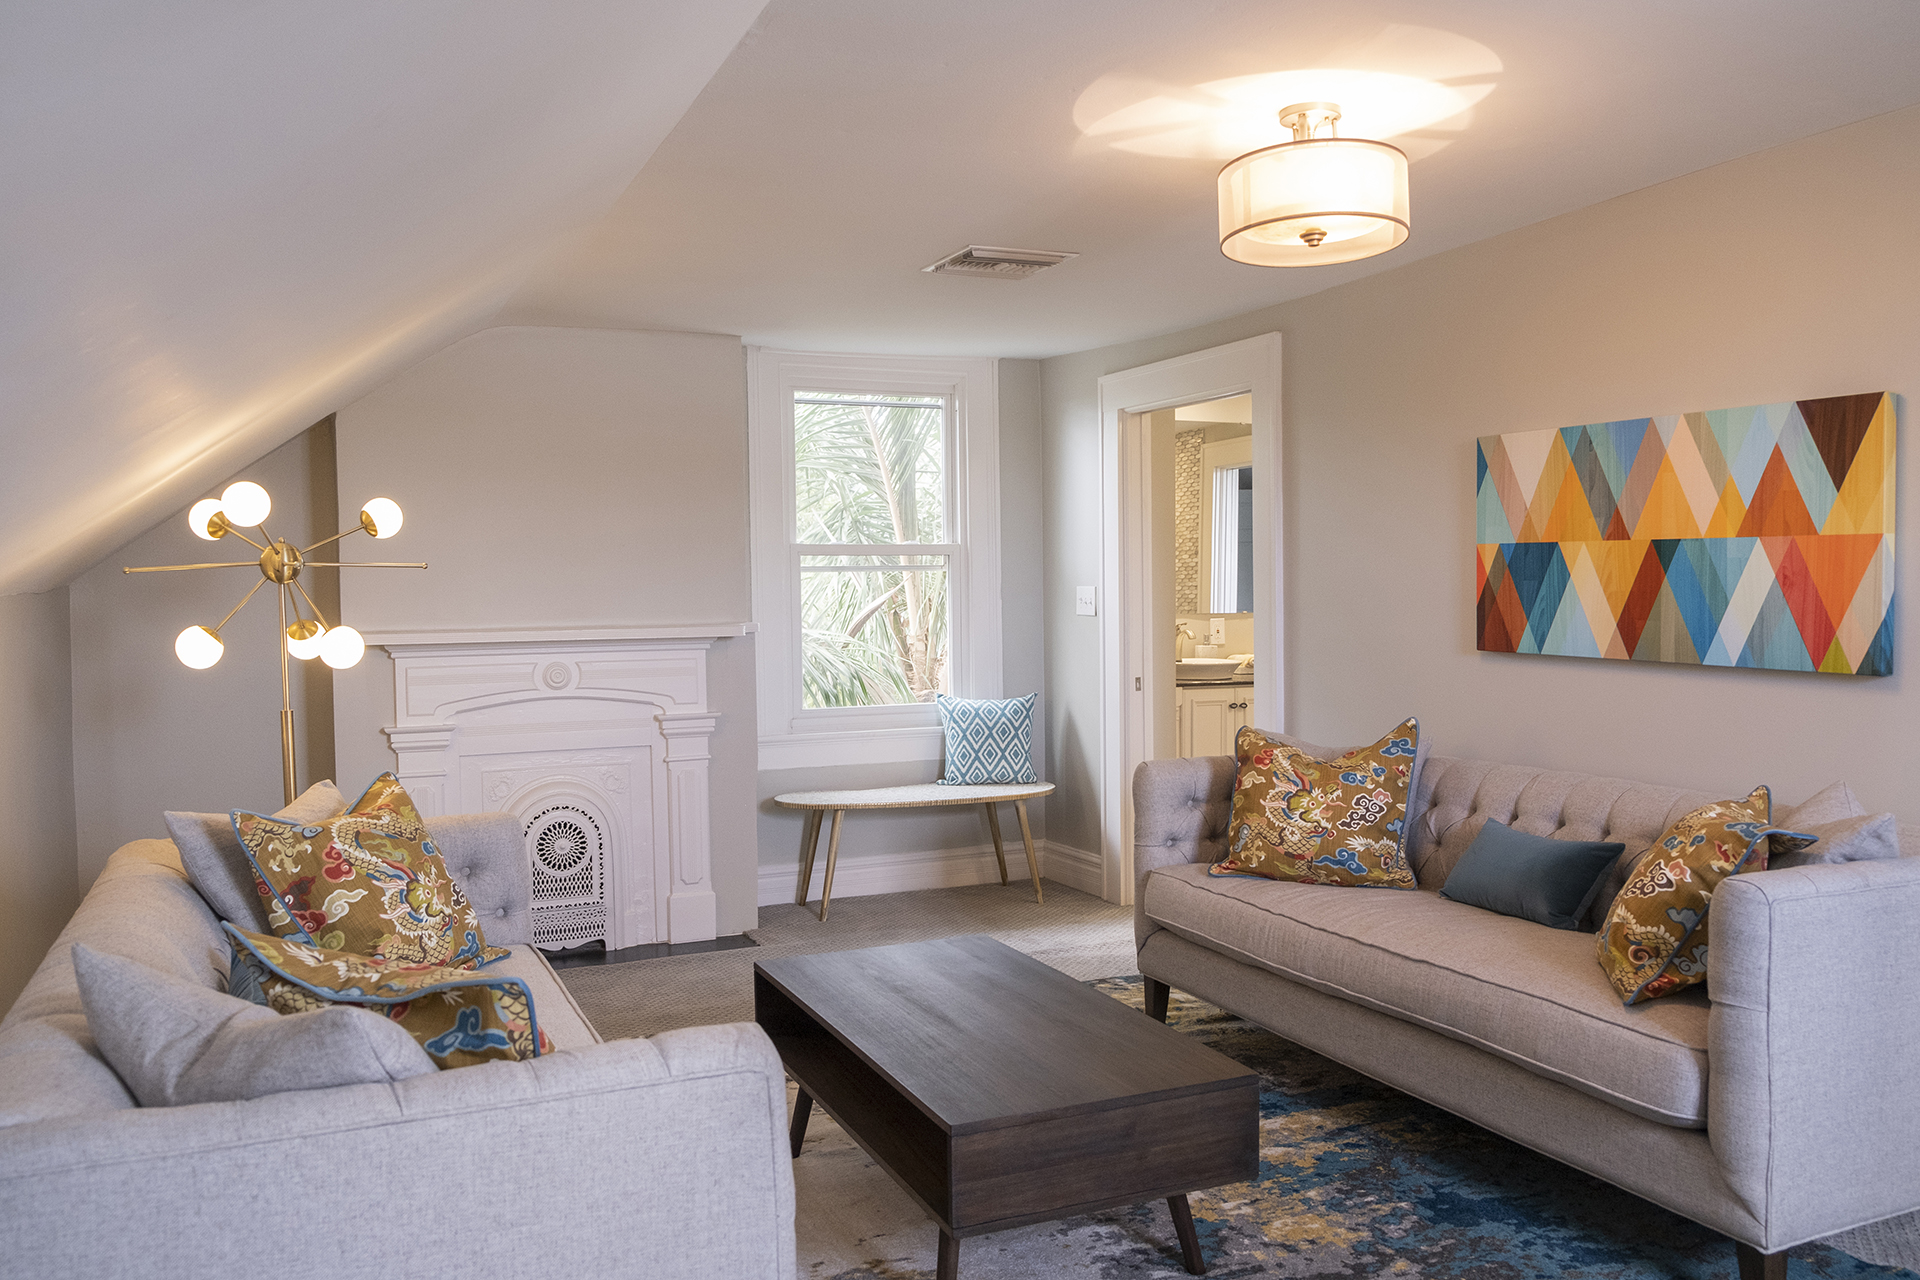 new orleans, staging, stager, bespoke staging and design, bespoke nola staging and design, home stager, home staging, real estate staging, real estate stager, property staging